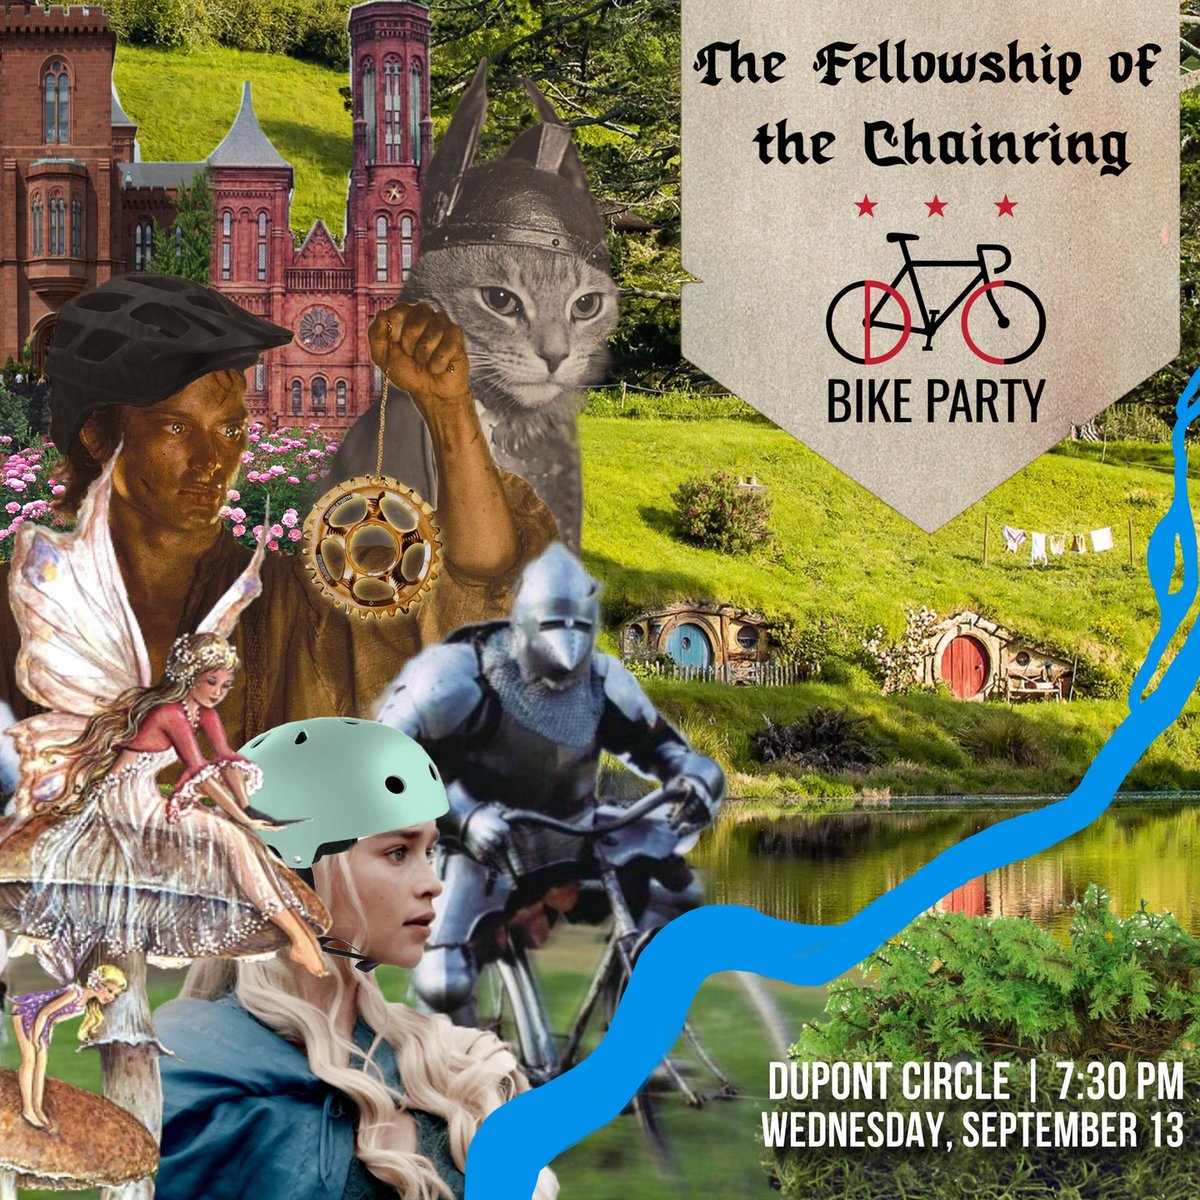 On 9/13 @ 7:30 pm, we ride! Join the Knights of the Chainring on a quest thru treacherous lands, battling malevolent forces. Our steeds wield magic against evil, guided by wizards & warriors. Journey to the Tavern of Destiny 4 joyous 🍻 More: facebook.com/events/s/dc-bi…